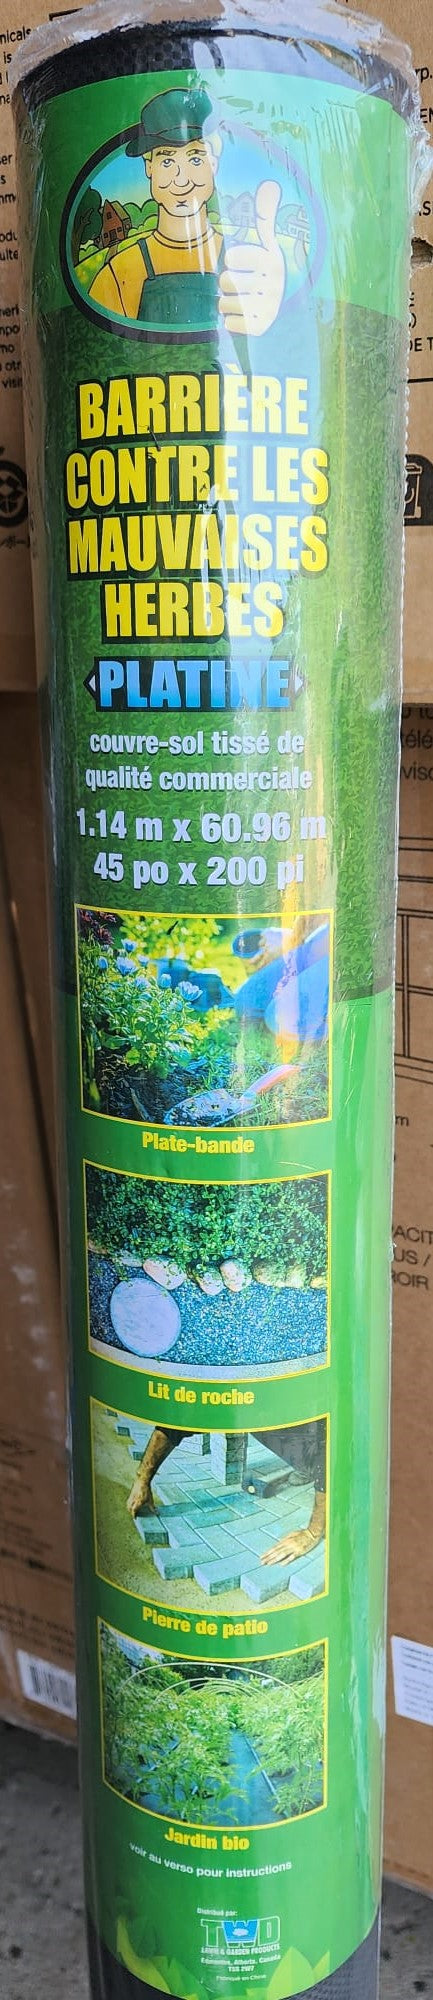 WEED BARRIER LANDSCAPE FABRIC 1 14 M X 60 96 M